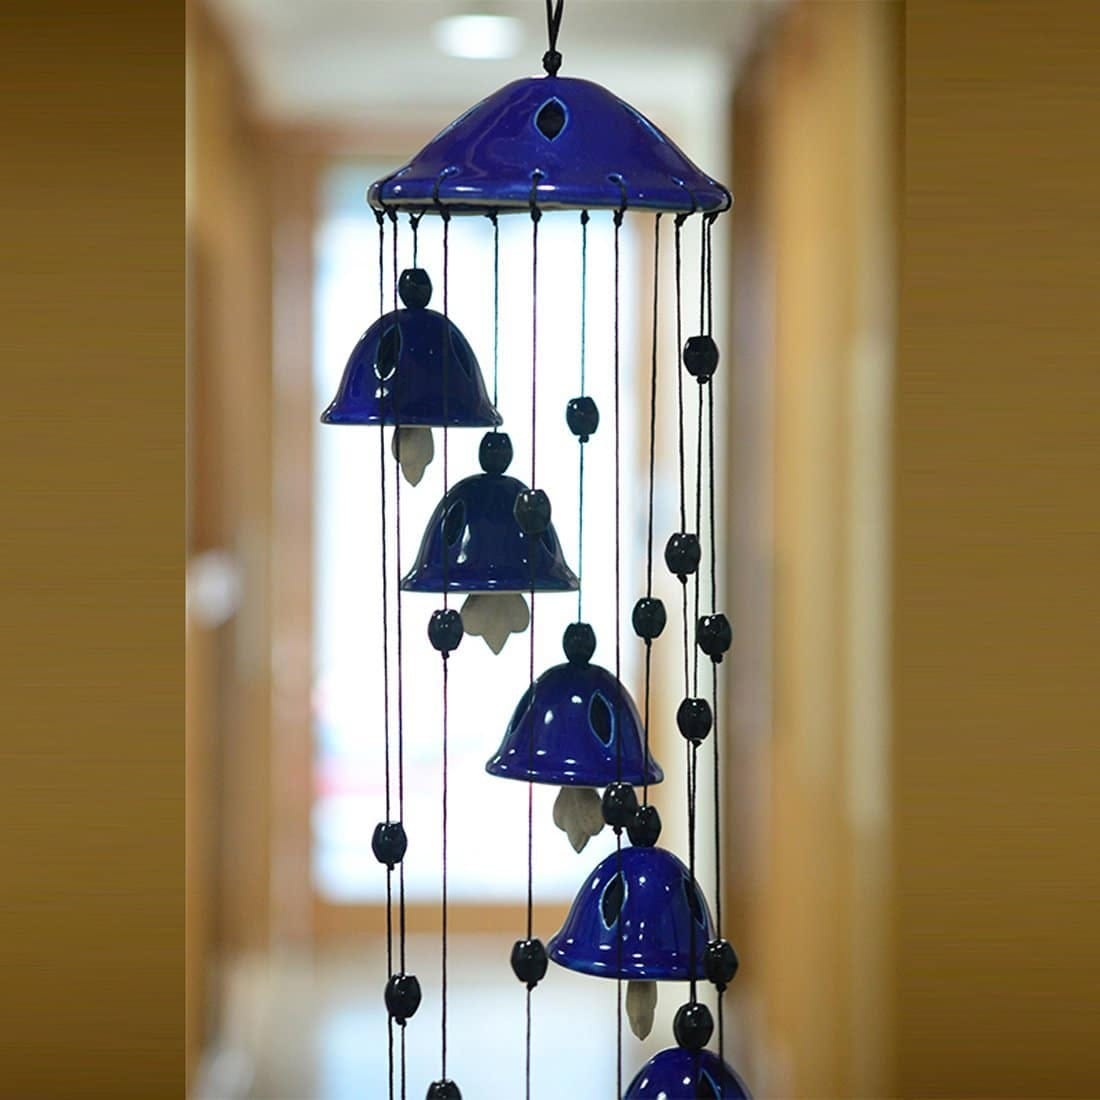 Best Wind Chime Vastu Advice For Home To Bring Prosperity, by Realtymonks